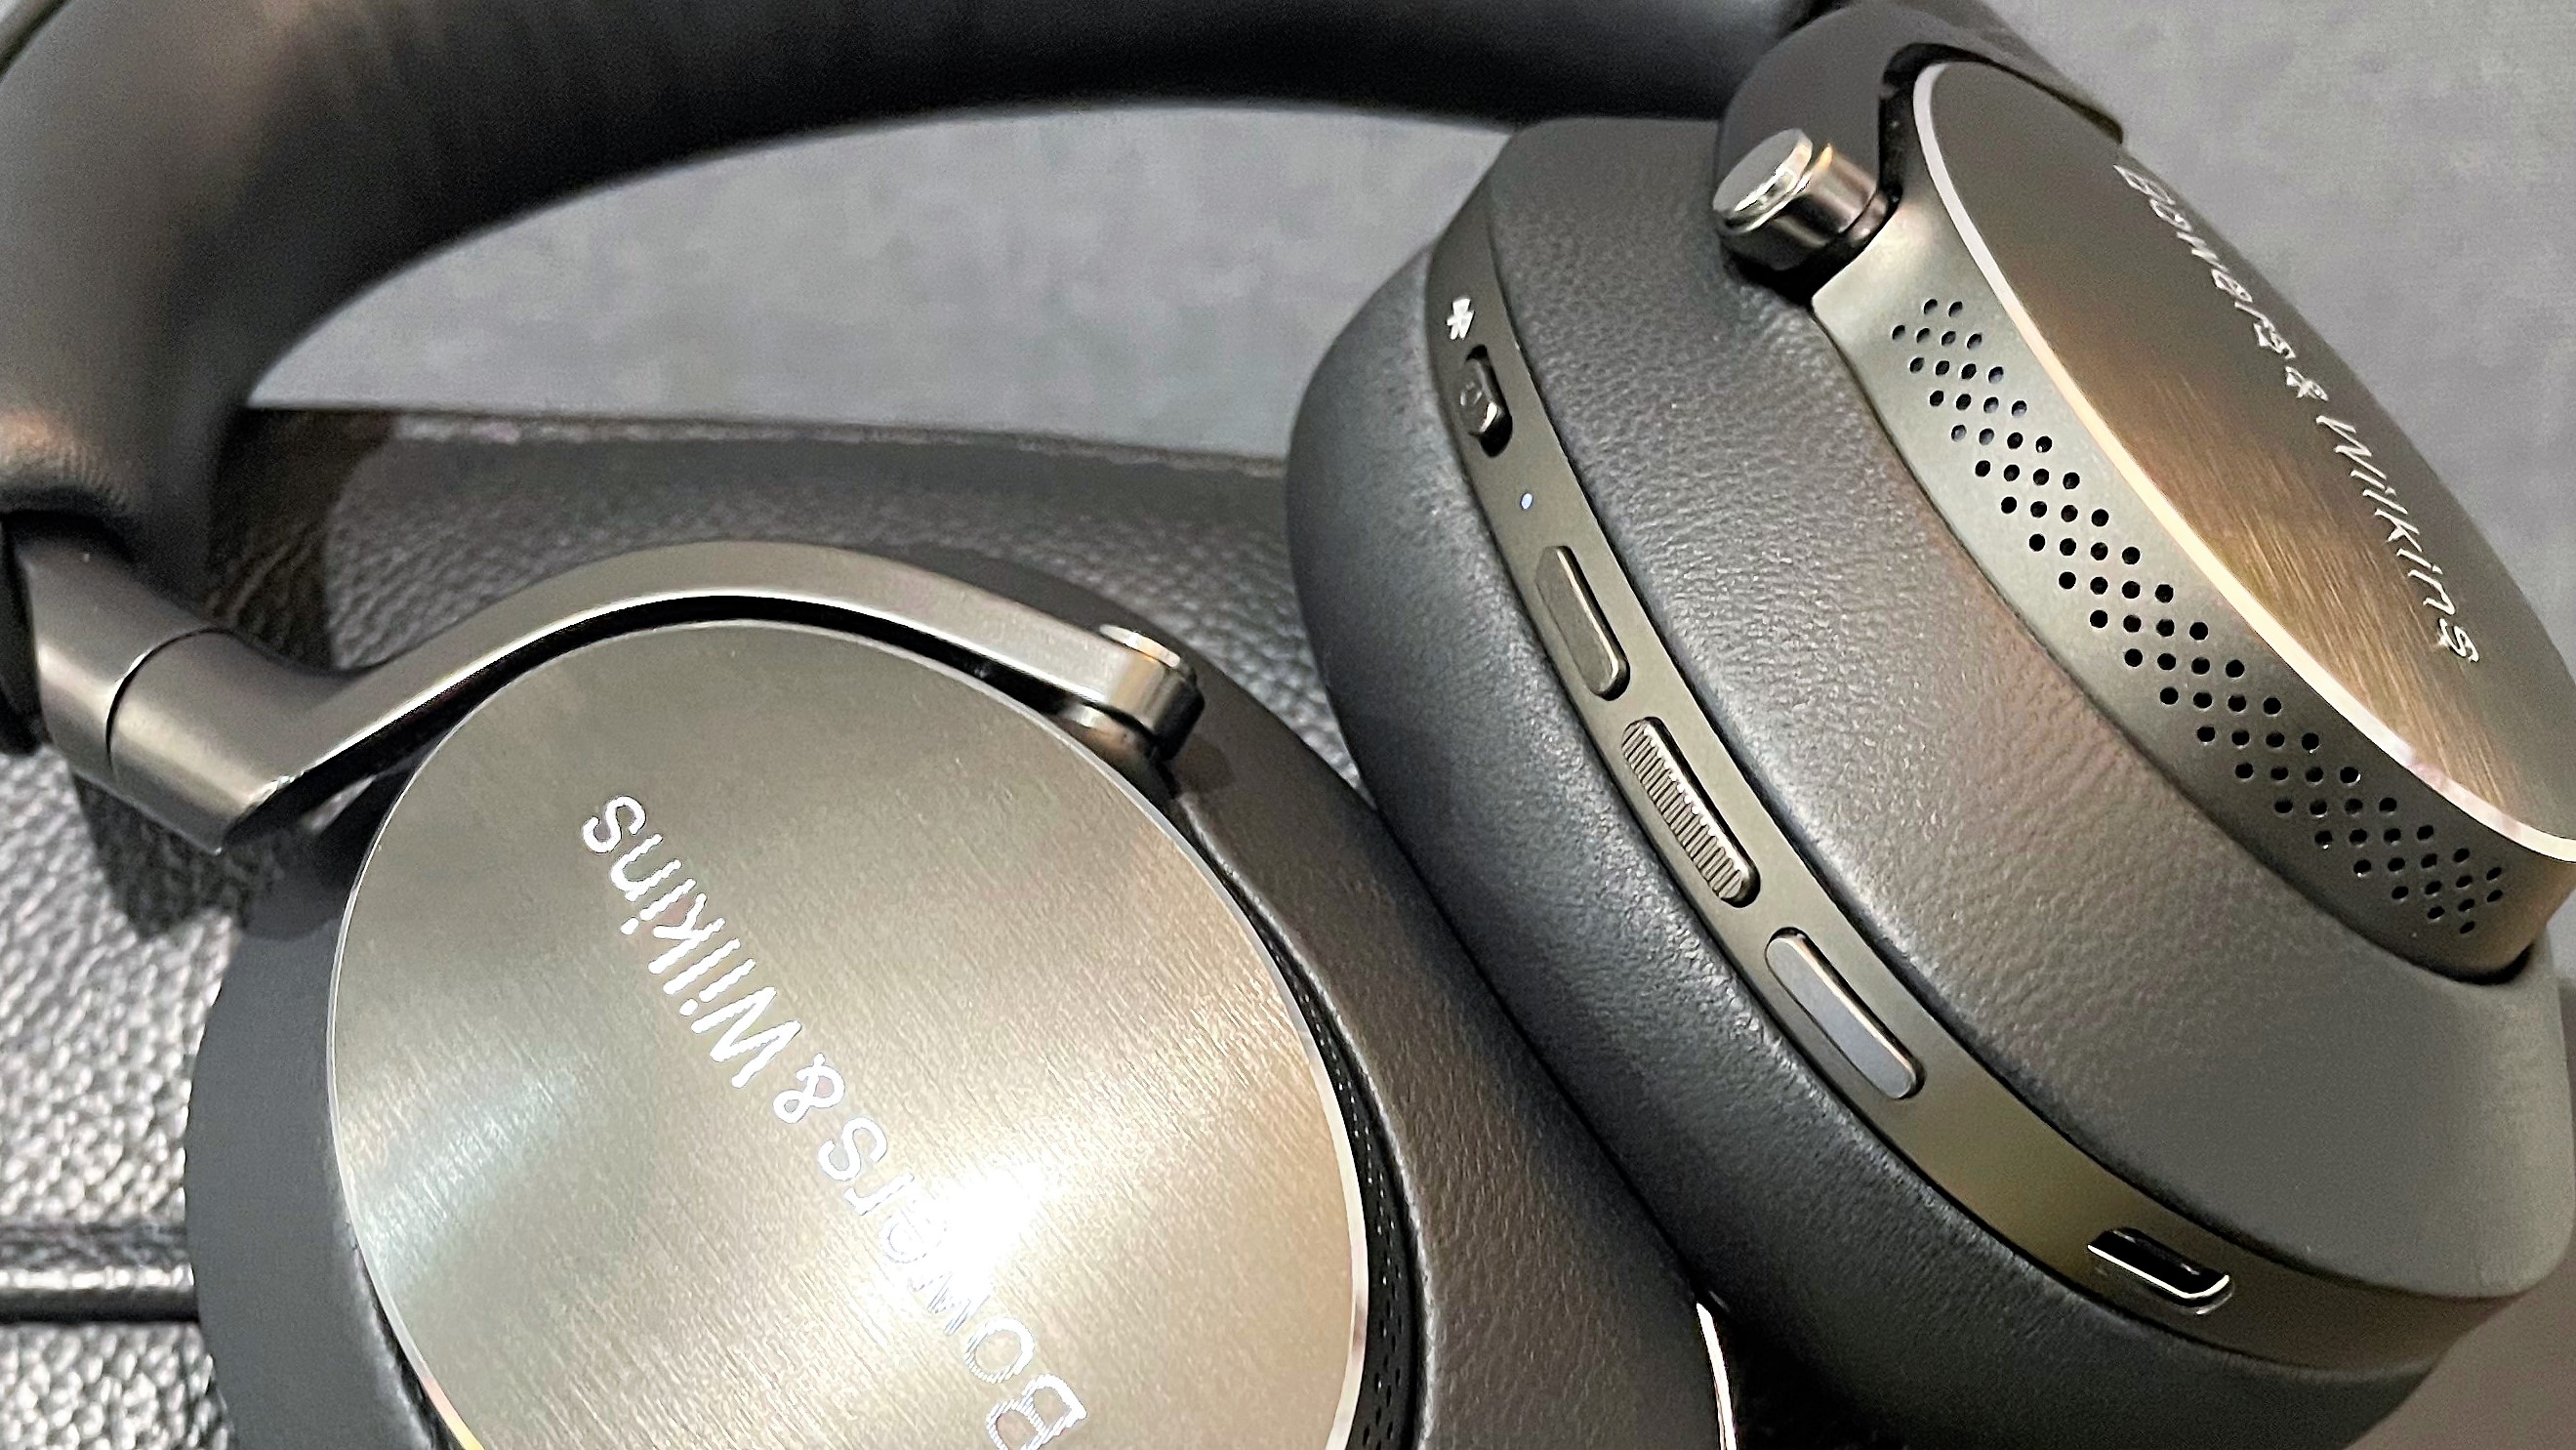 Bowers & Wilkins Px8 showing control buttons in black and build quality details